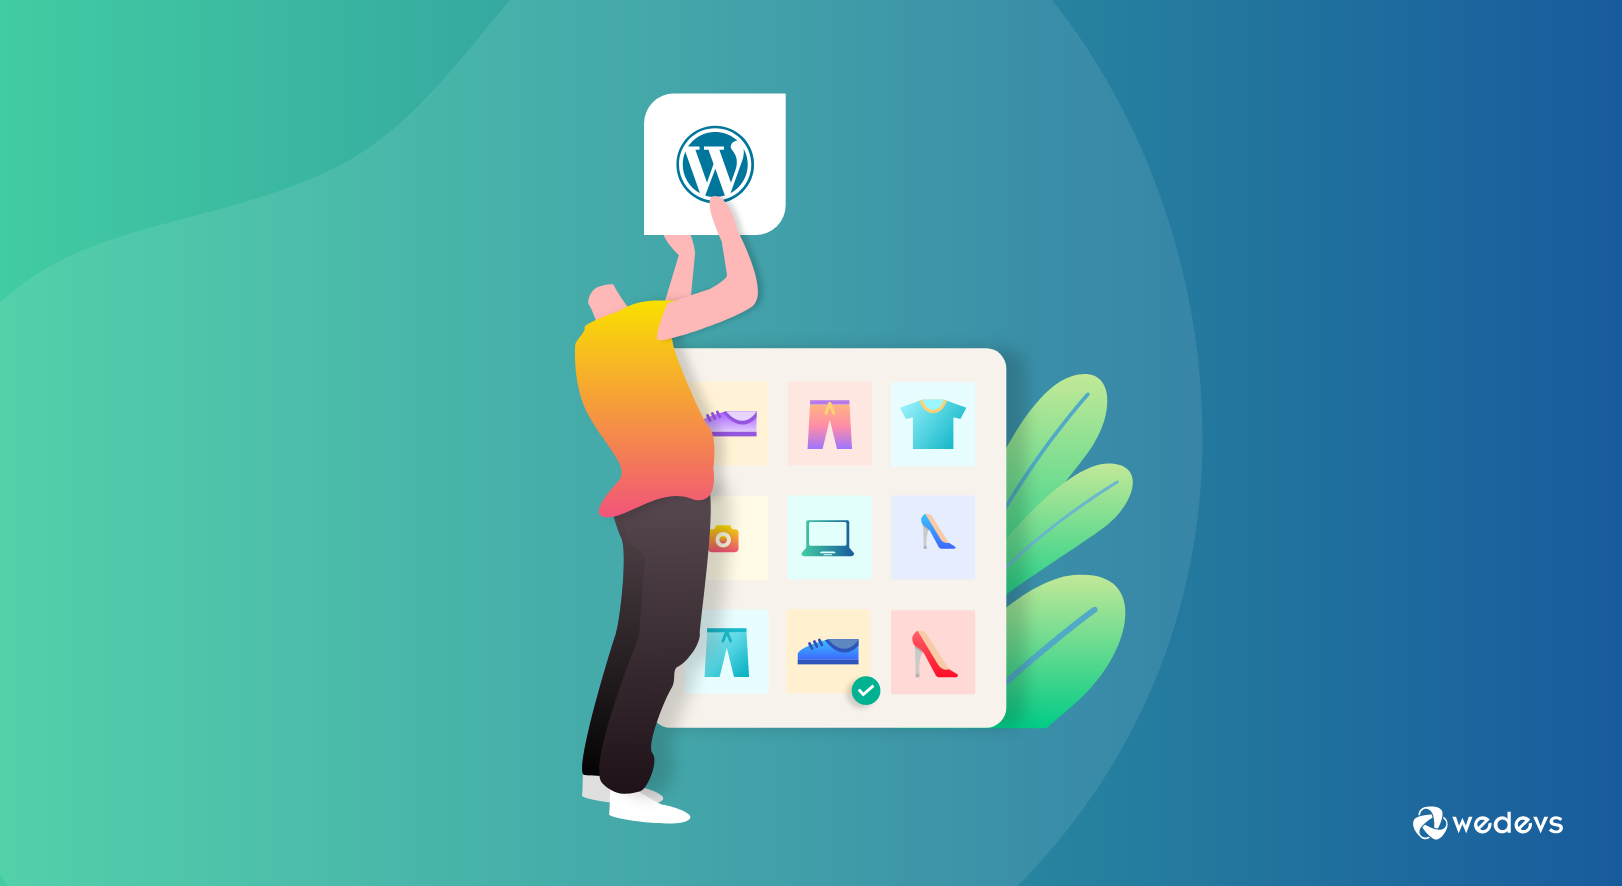 Appsero Review 2020: A Year of Serving WordPress Developers to Make Their Business Journey Easier